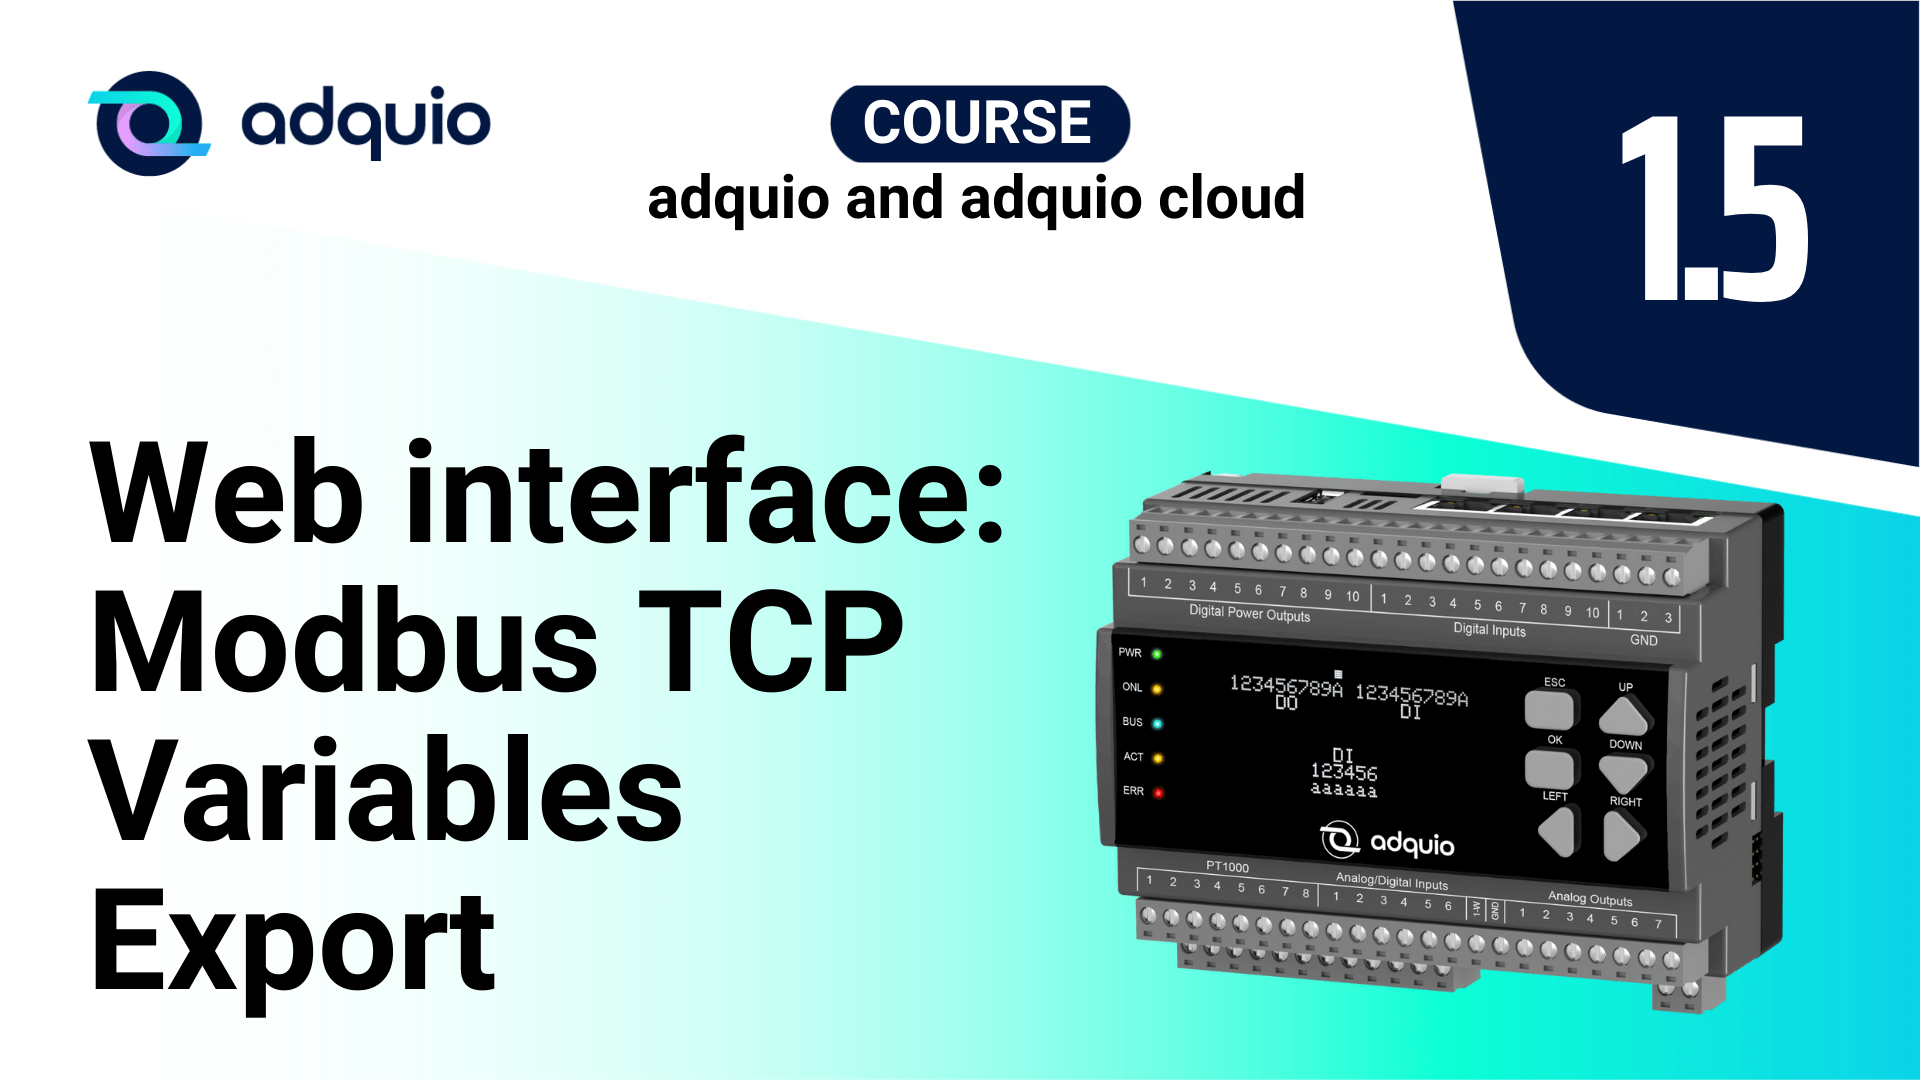 Adquio Web interface: Exporting variables using Modbus TCP